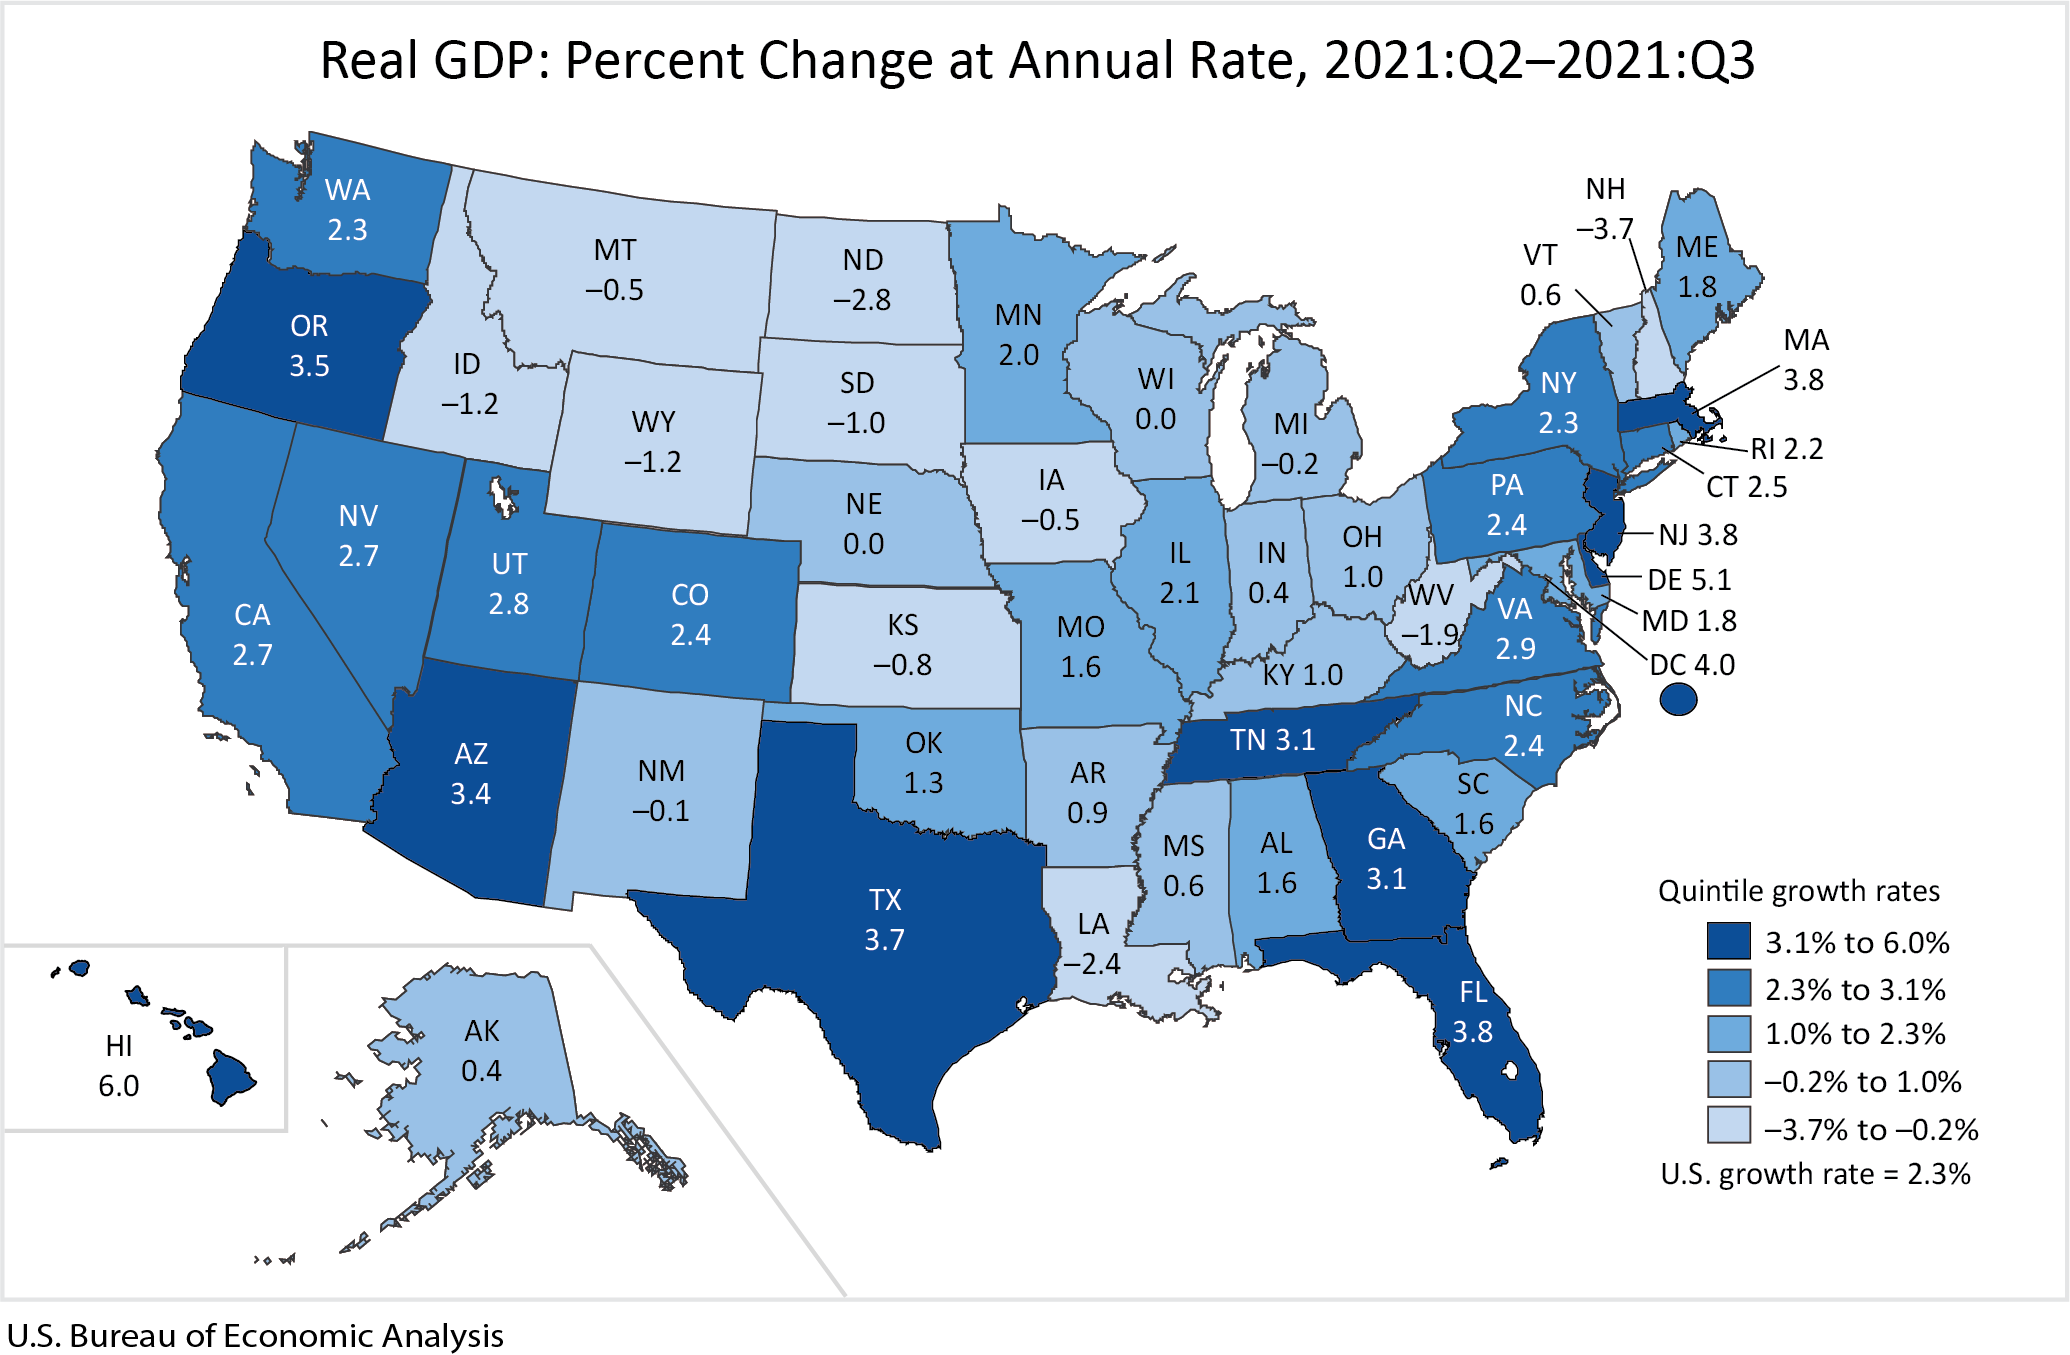 Real GDP: Percent Change at Annual Rate, 2021:Q2-2021:Q3